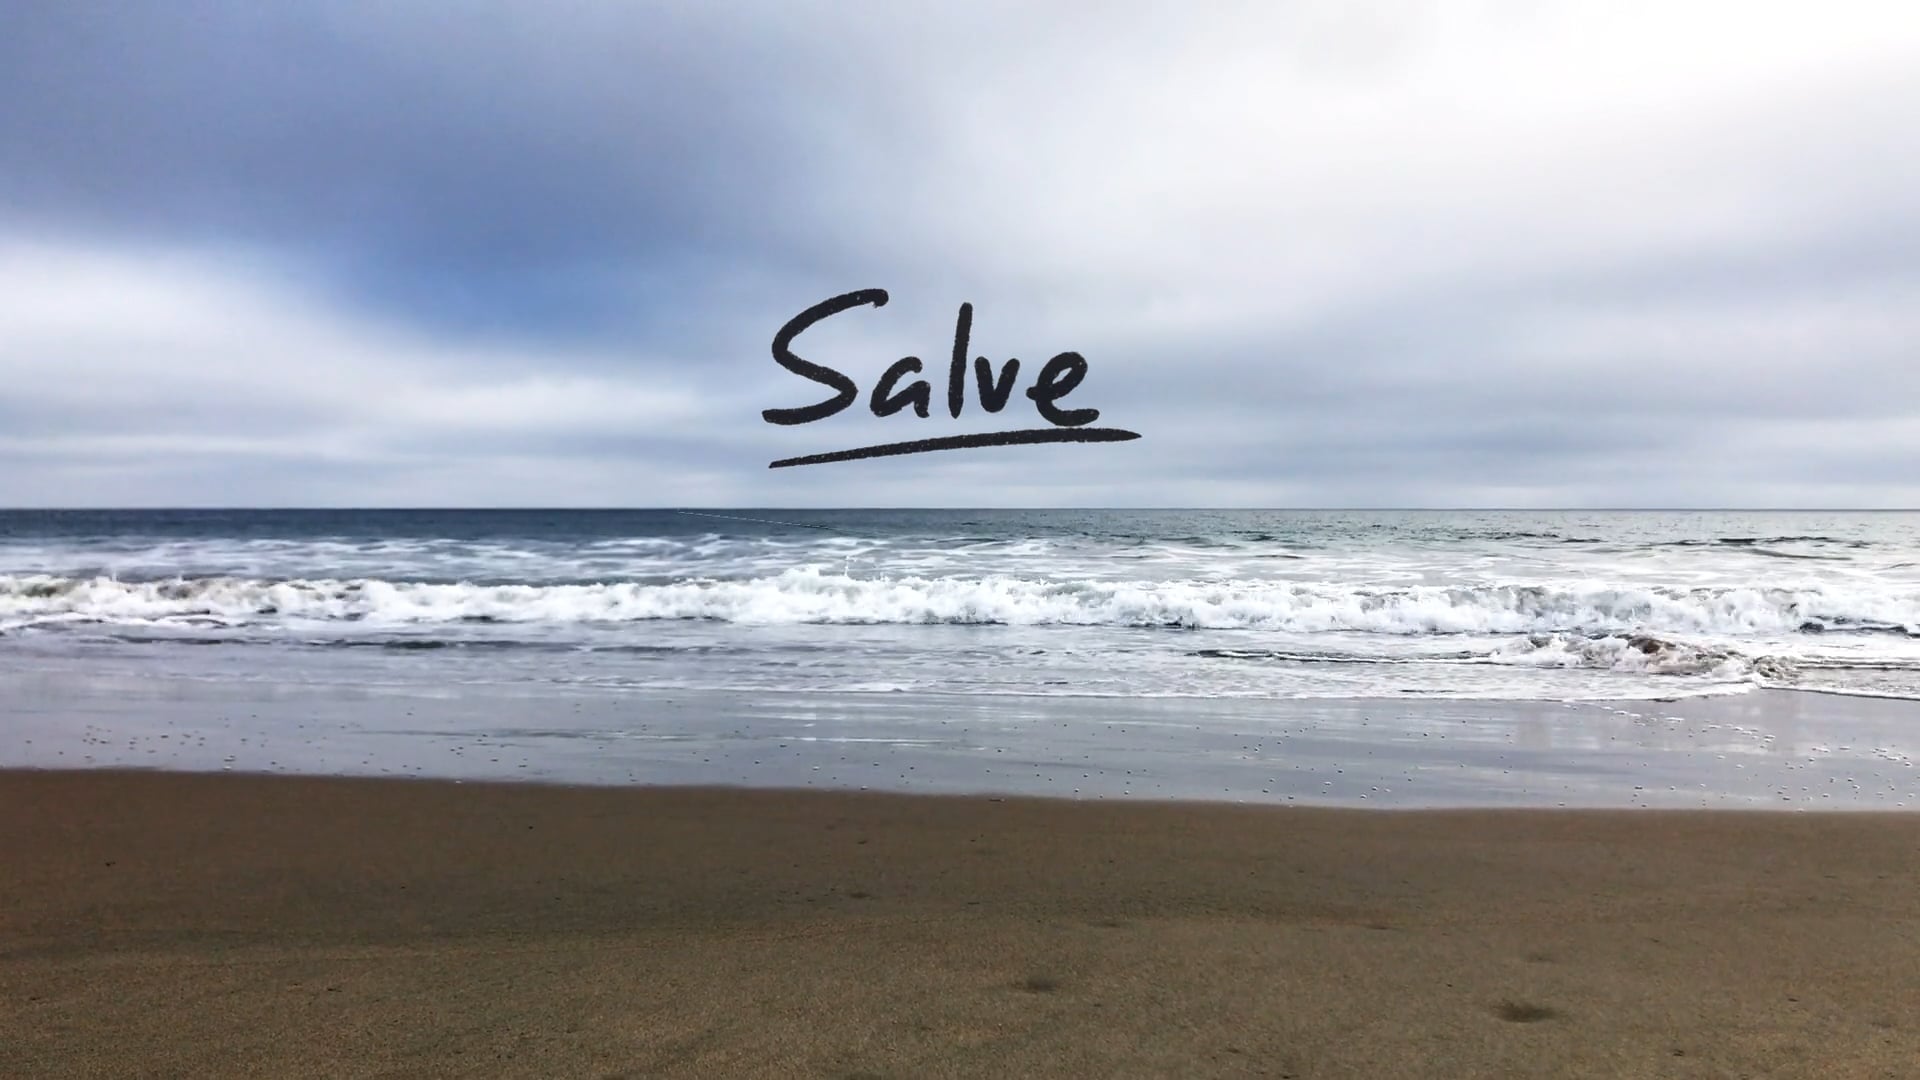 Salve by April Martin and Paul Hill